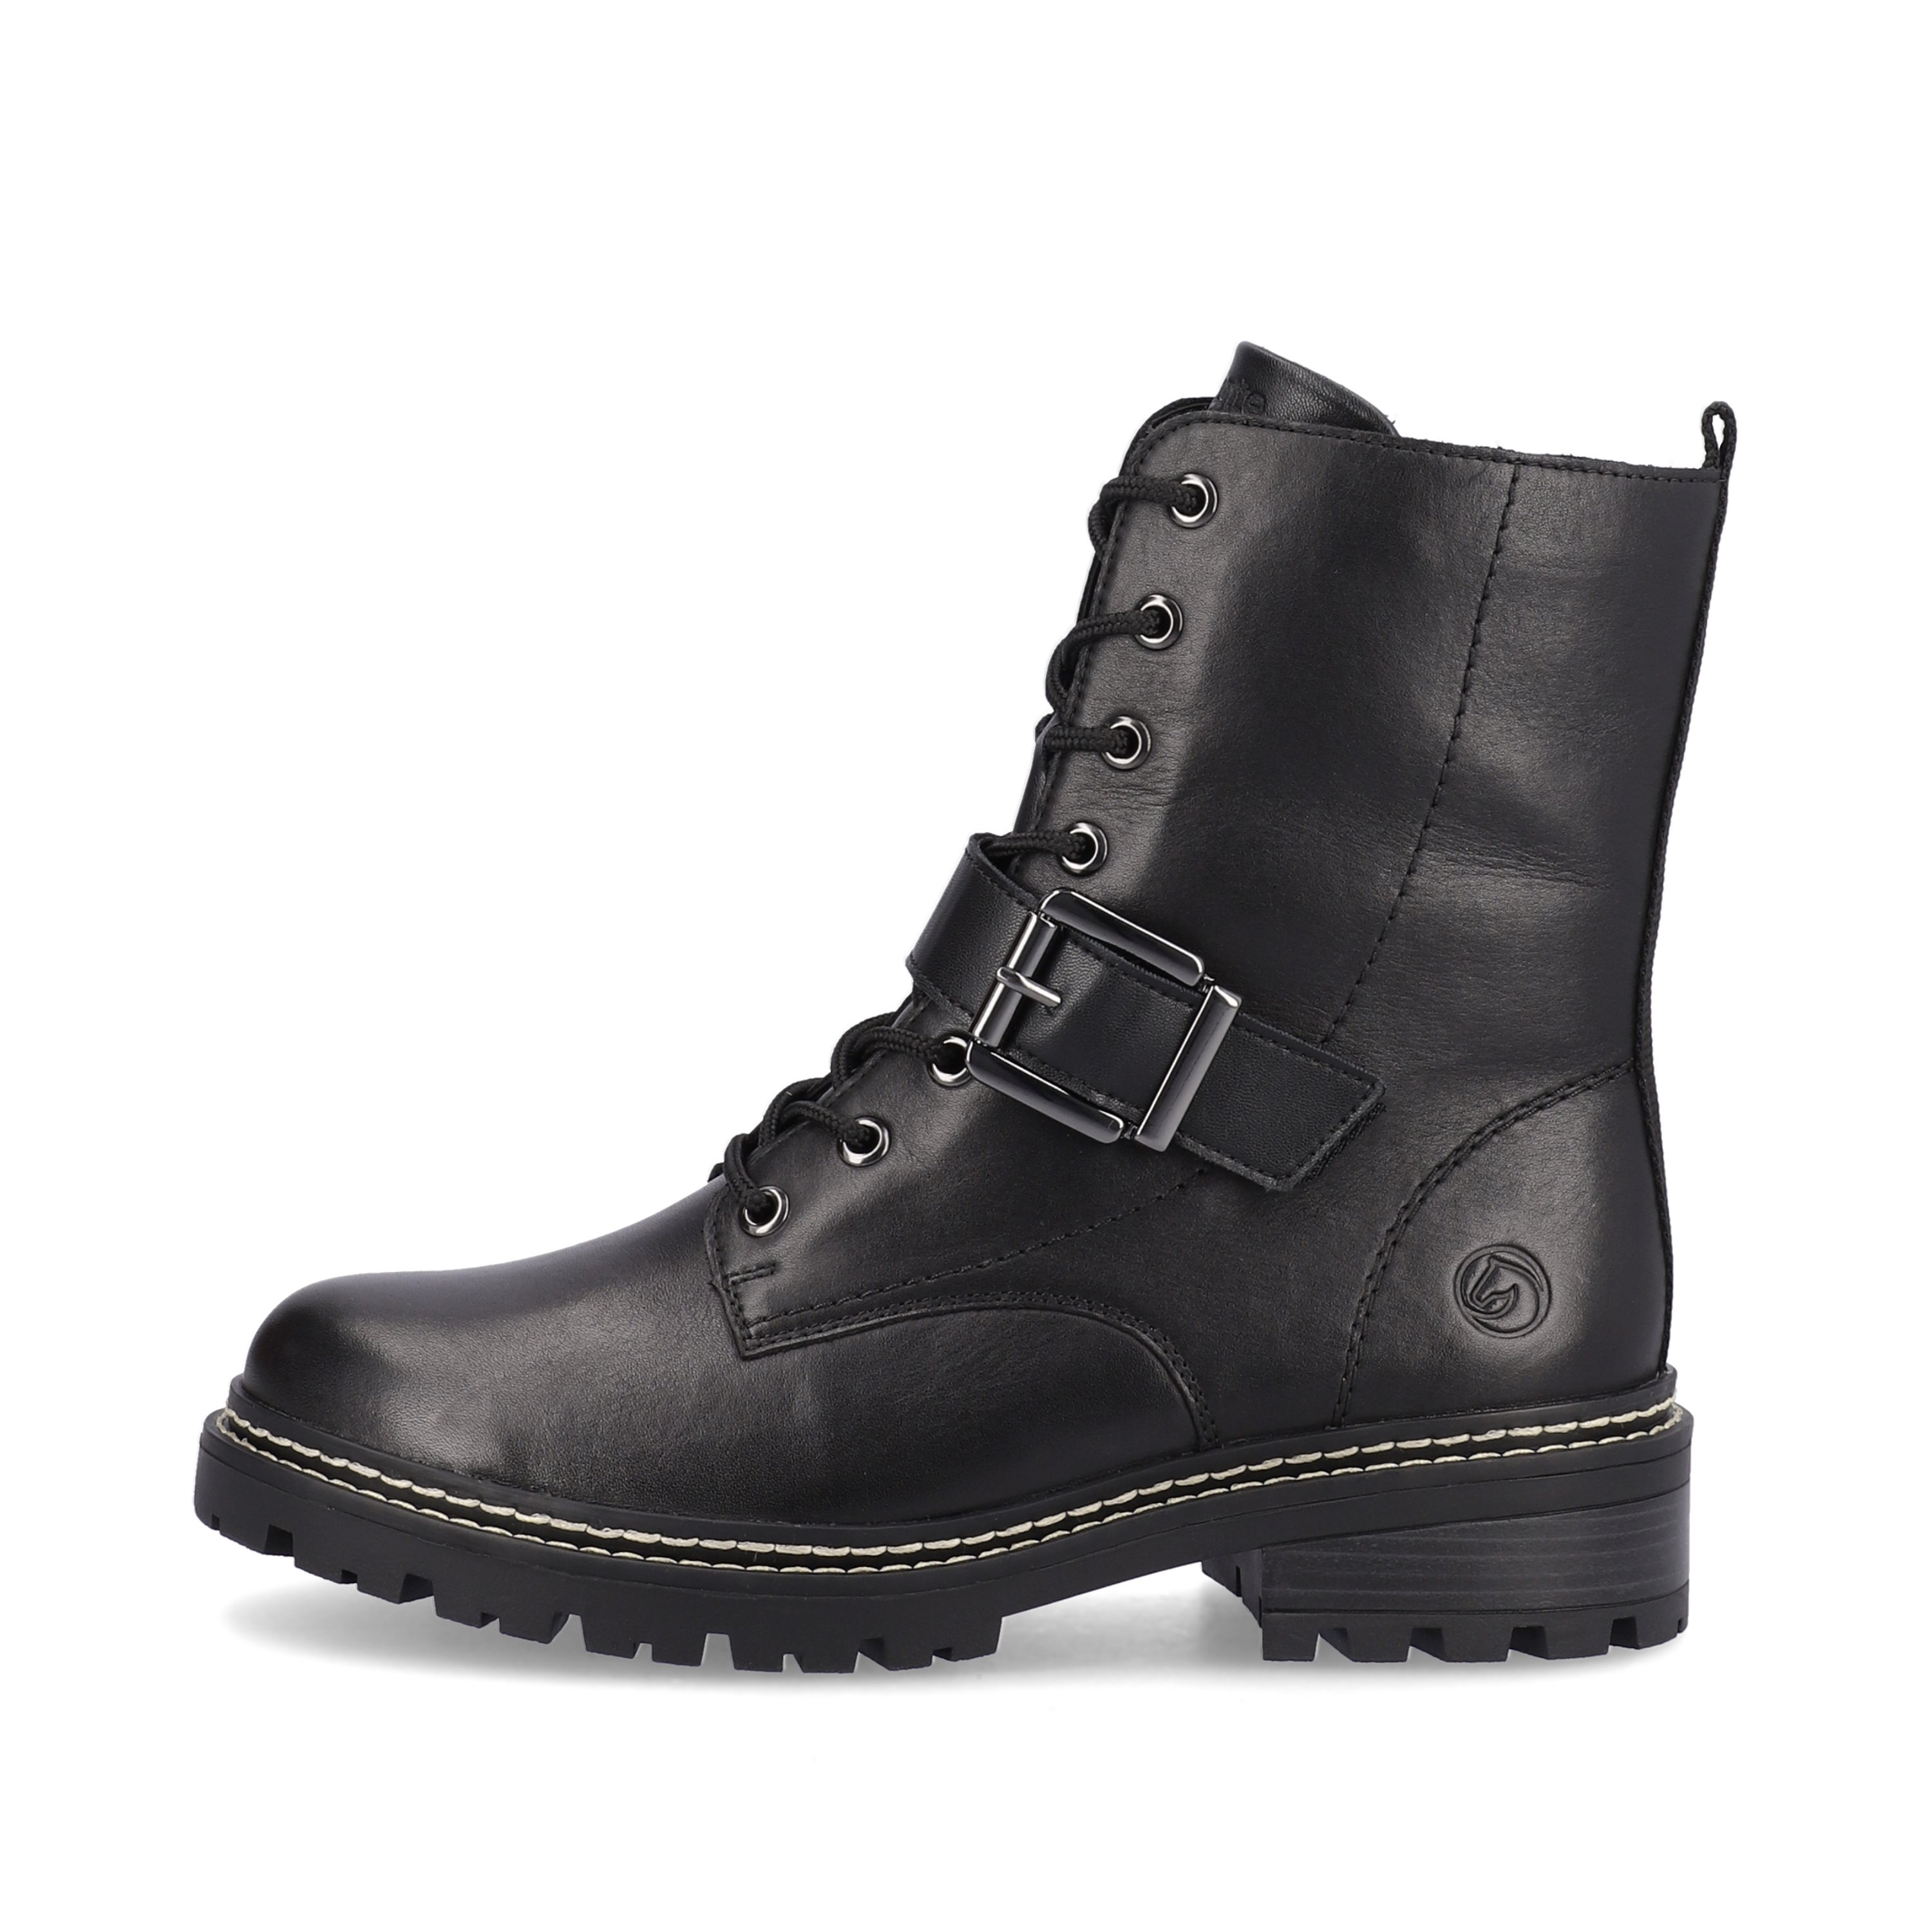 Jet black remonte women´s biker boots D0B78-01 with cushioning profile sole. The outside of the shoe